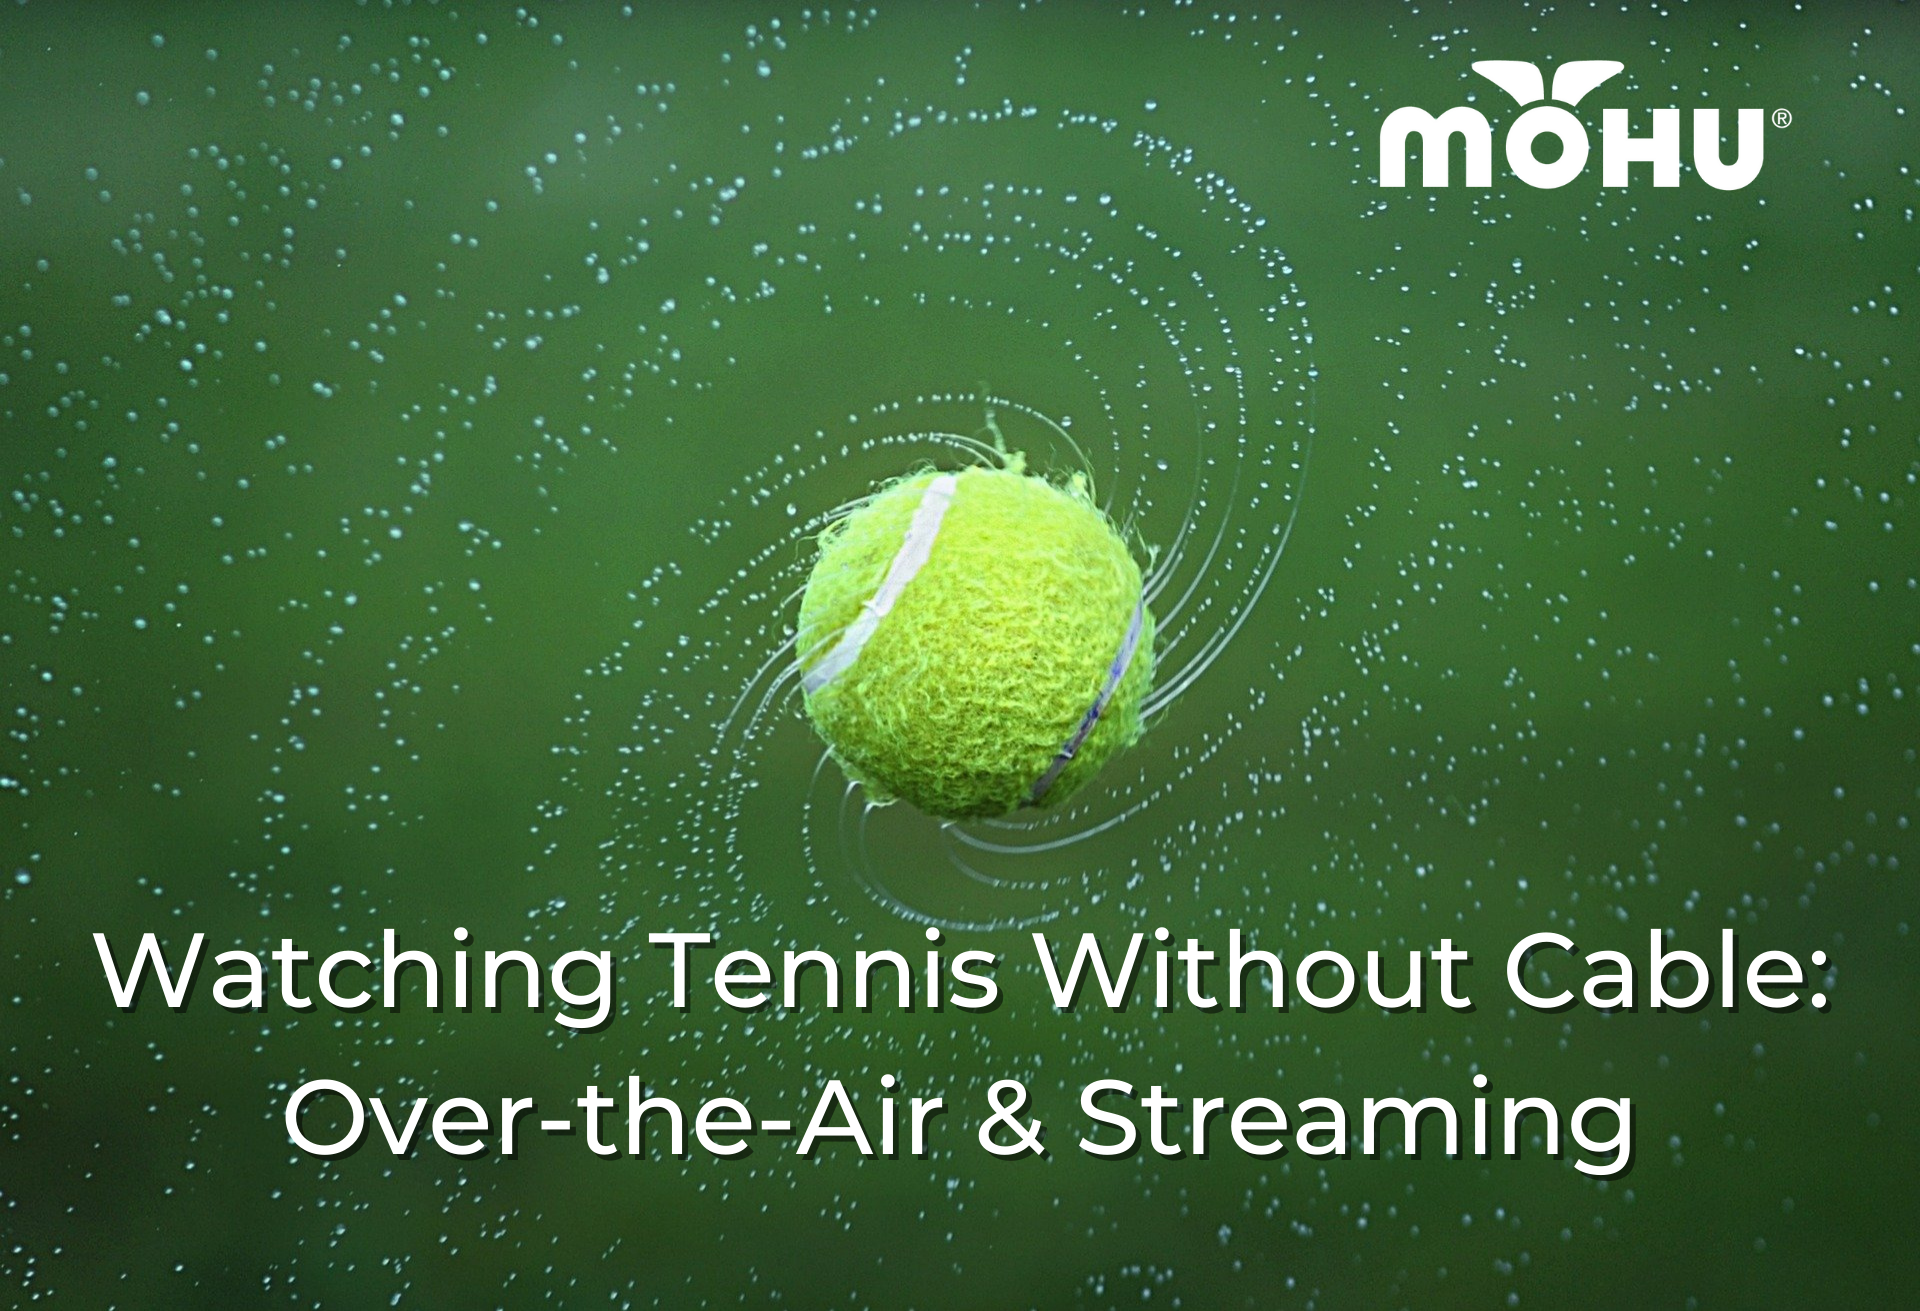 Tennis ball flying through the air, Watching Tennis Without Cable: Over-the-Air & Streaming, Mohu logo